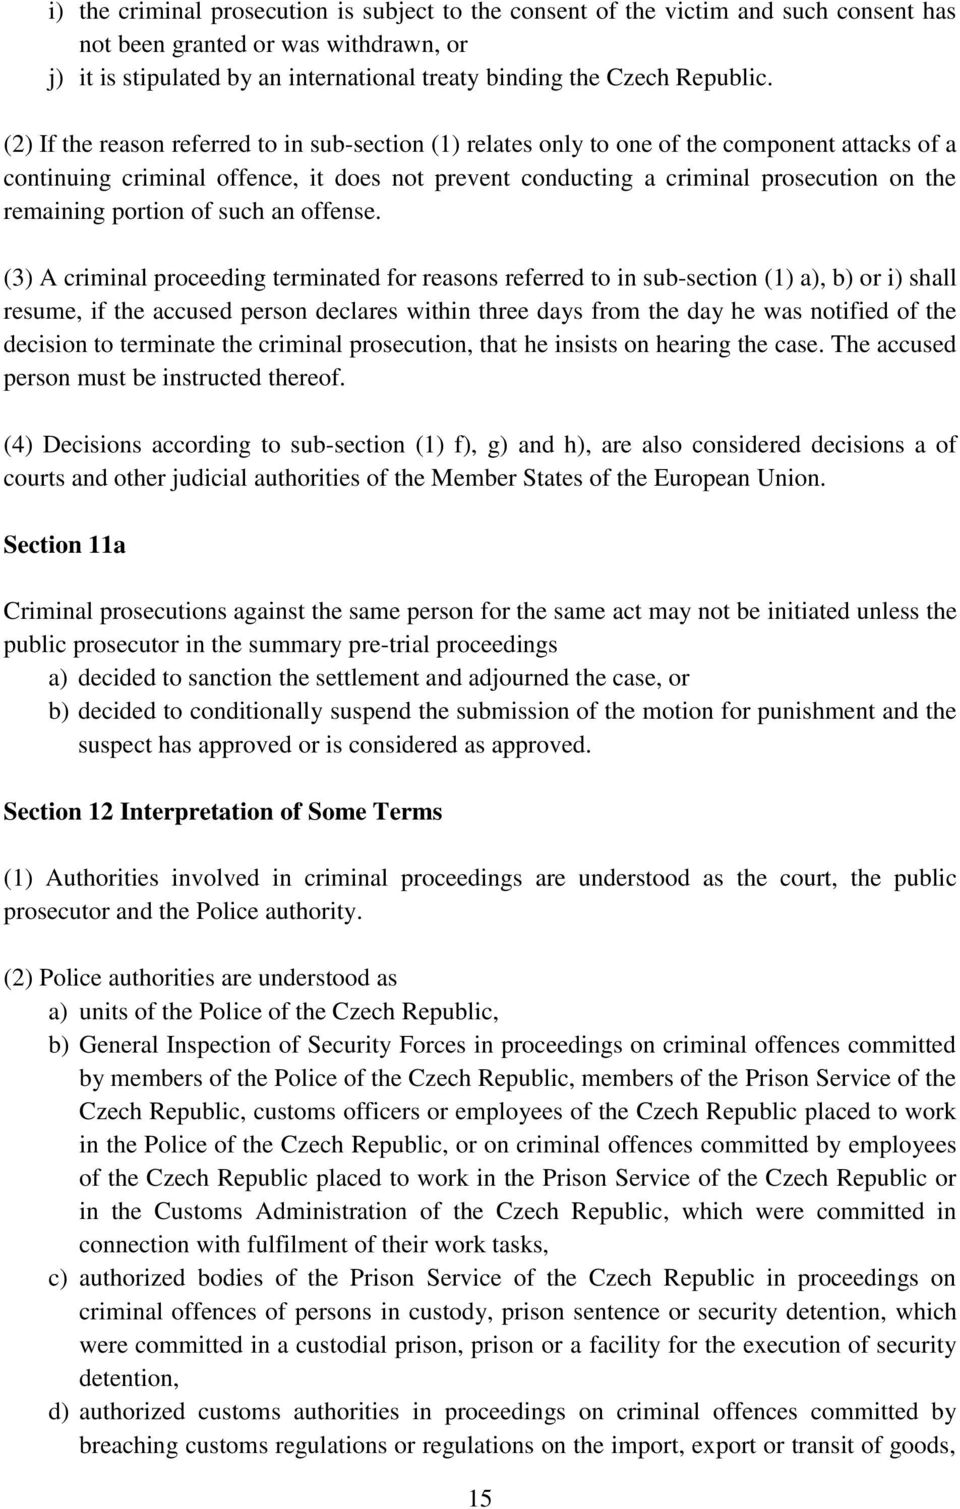 (2) If the reason referred to in sub-section (1) relates only to one of the component attacks of a continuing criminal offence, it does not prevent conducting a criminal prosecution on the remaining